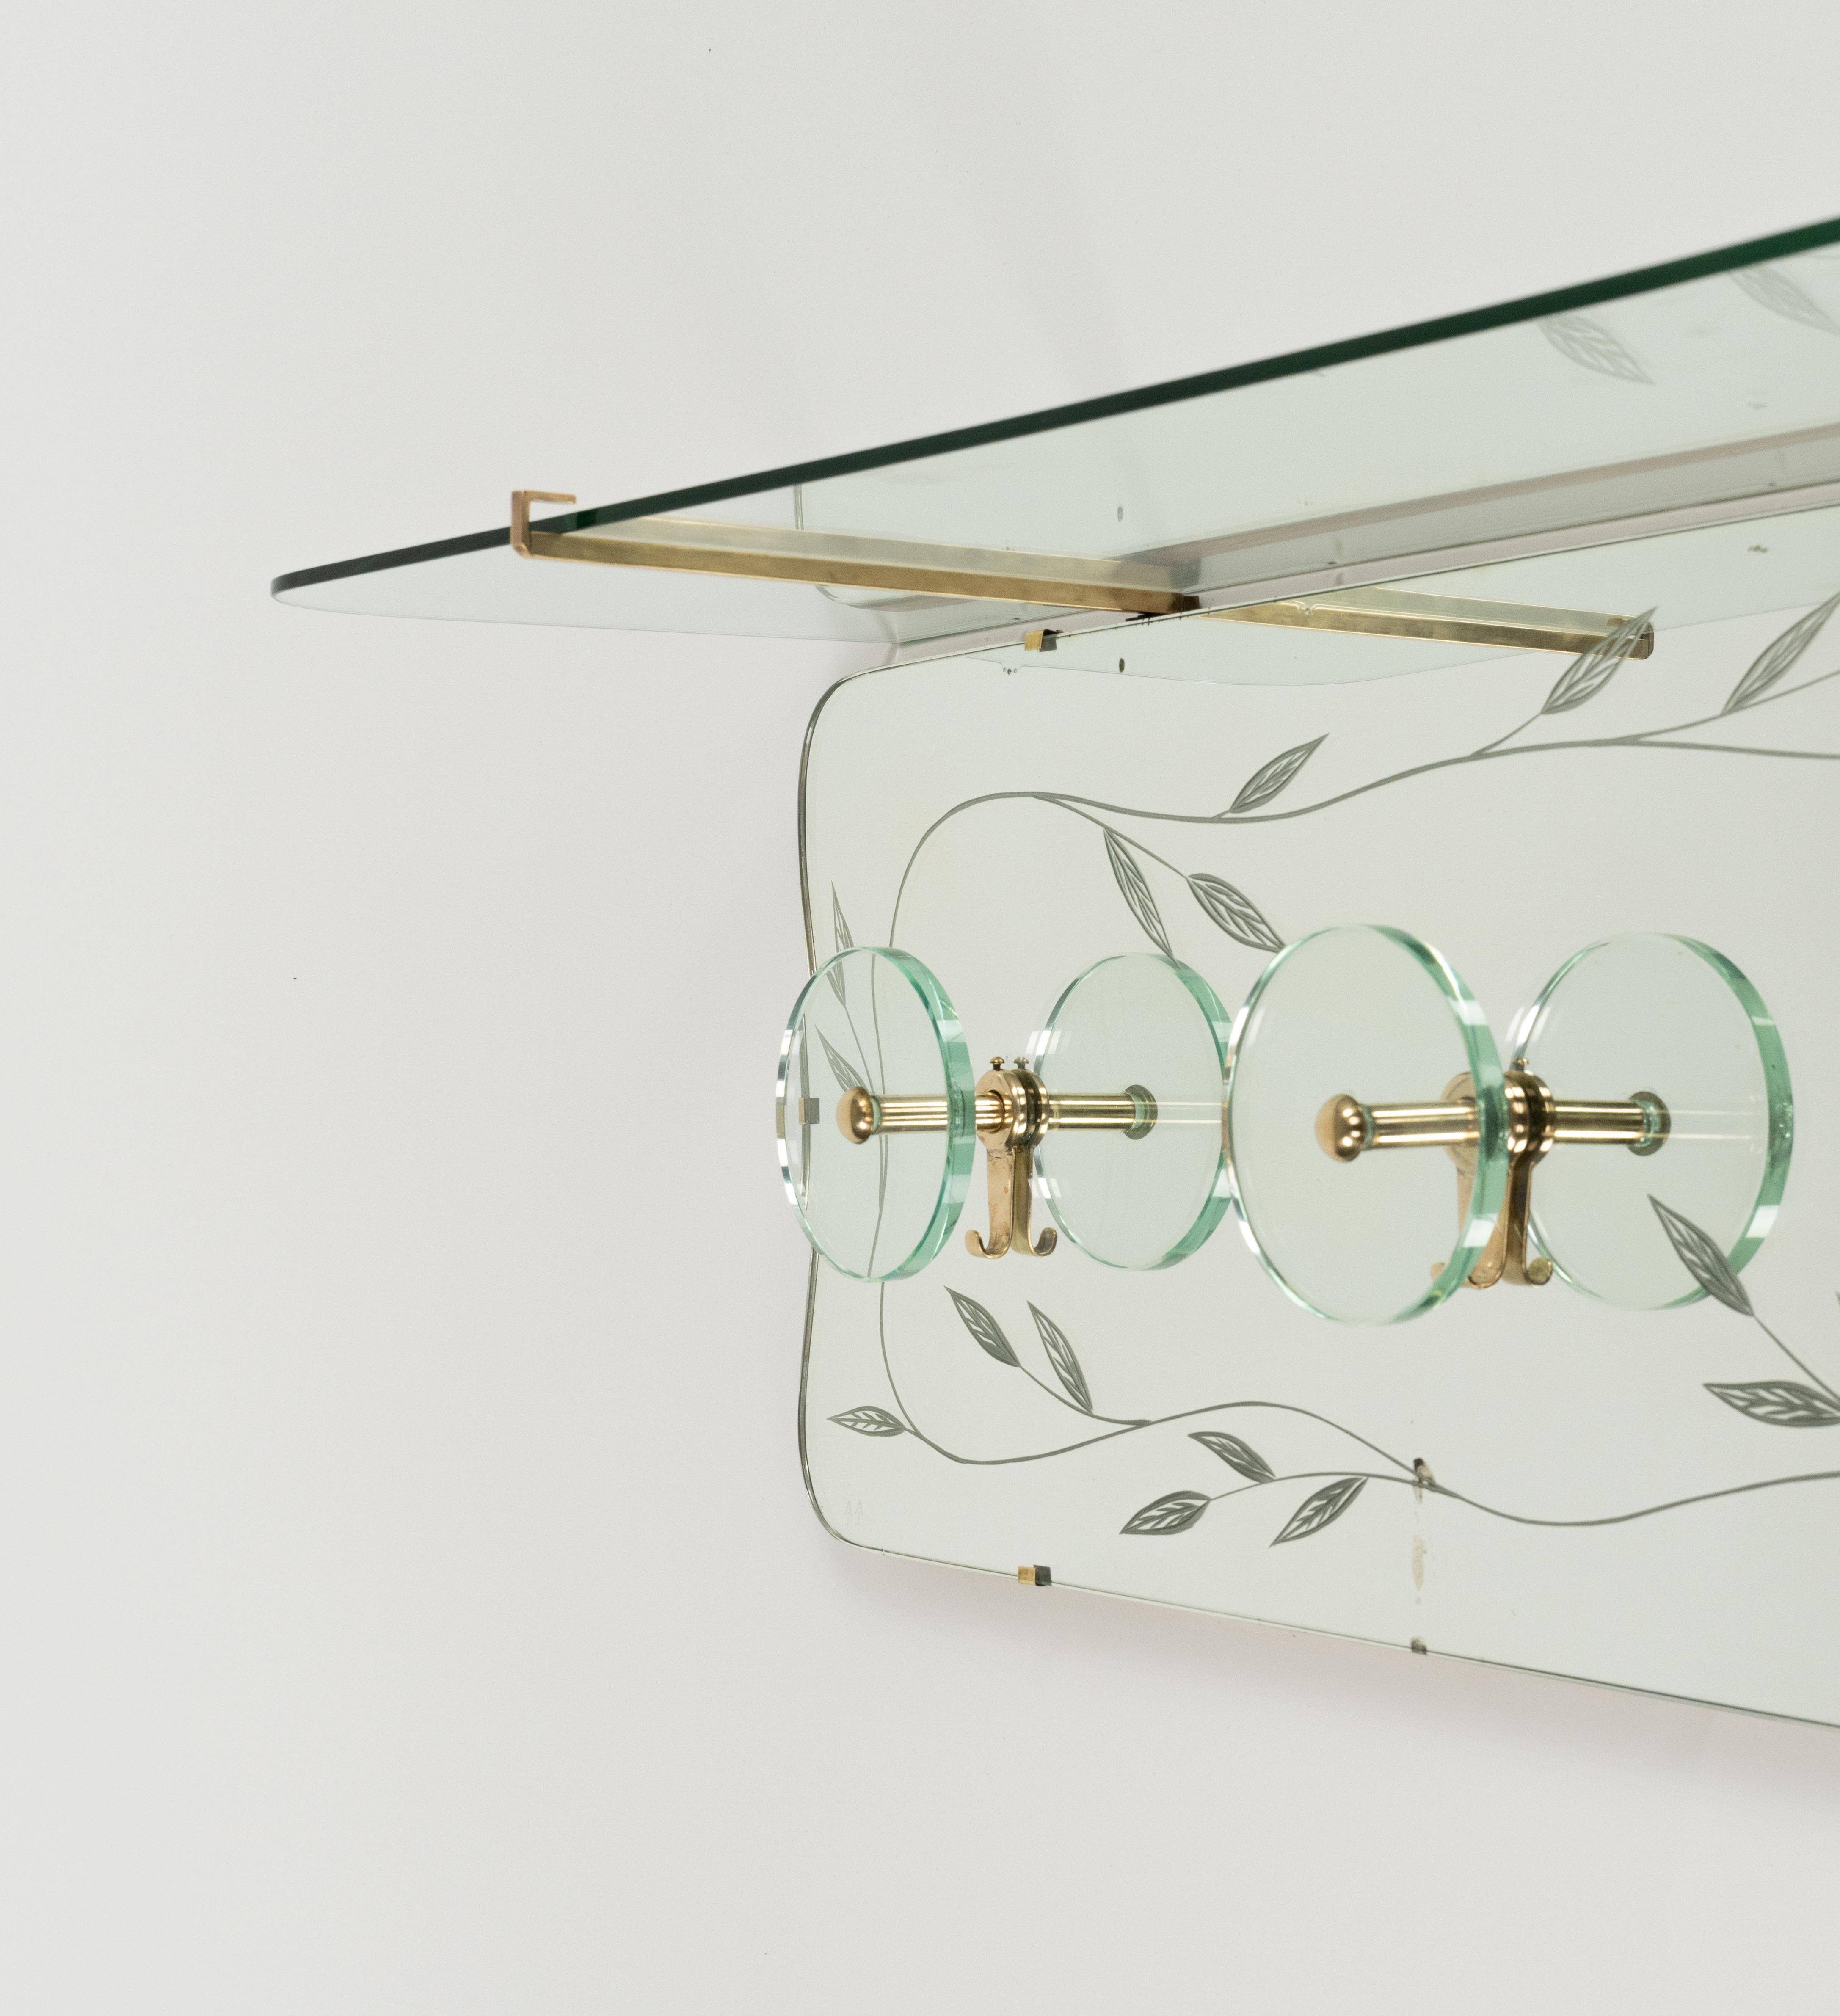 Midcentury Coat Rack Shelf in Mirror, Brass & Glass by Cristal Art, Italy, 1950s For Sale 9